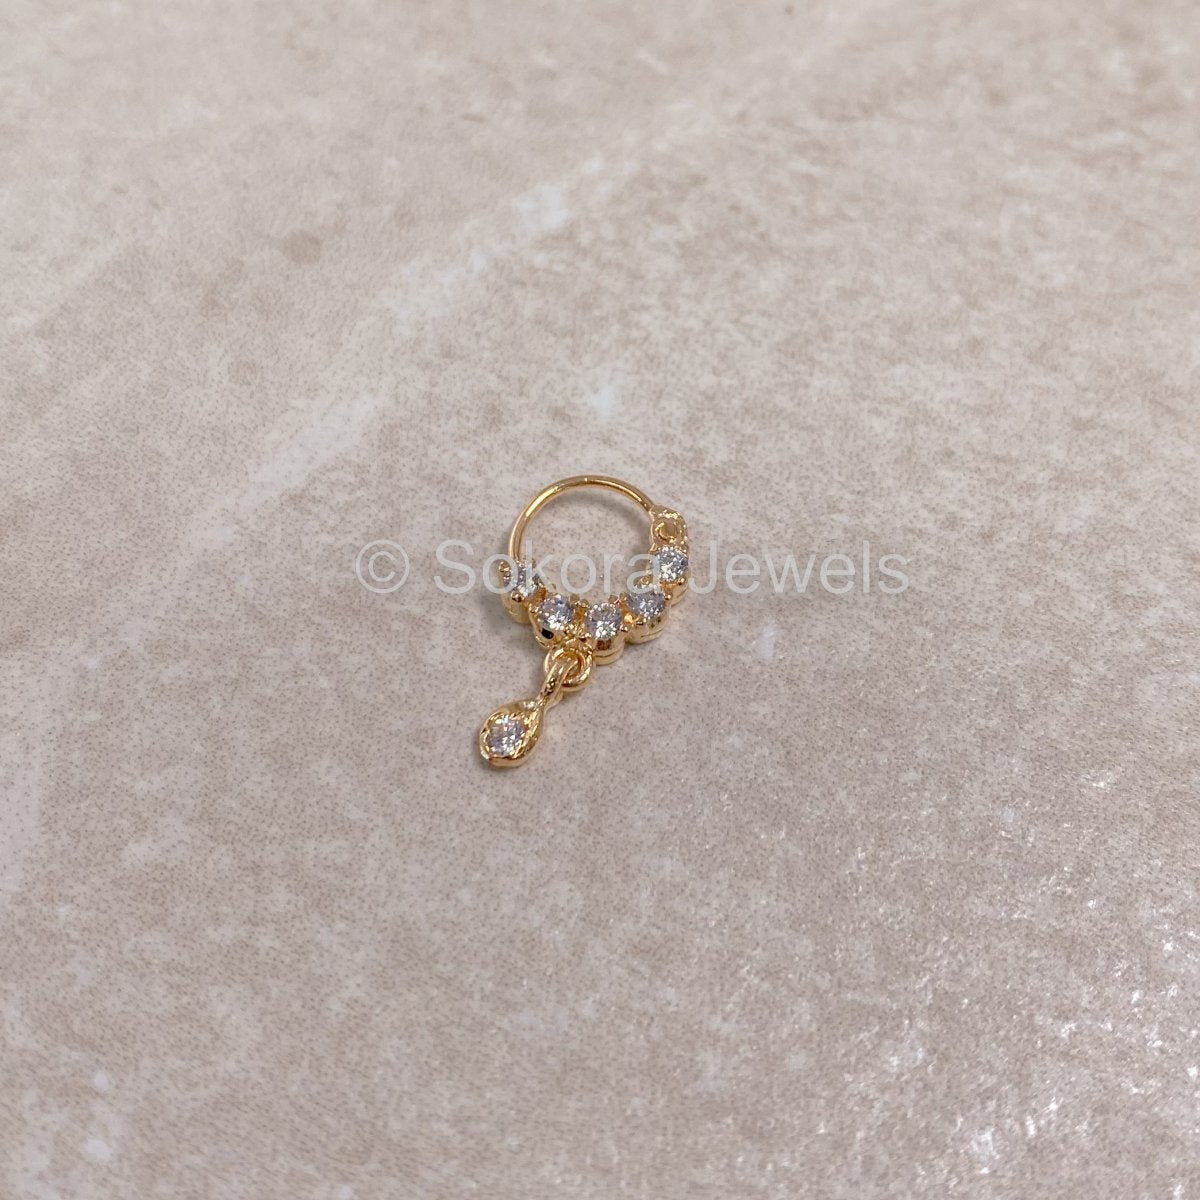 Small Gold & Clear Crystal Nose Ring - Pierced (Left) - SOKORA JEWELSSmall Gold & Clear Crystal Nose Ring - Pierced (Left)